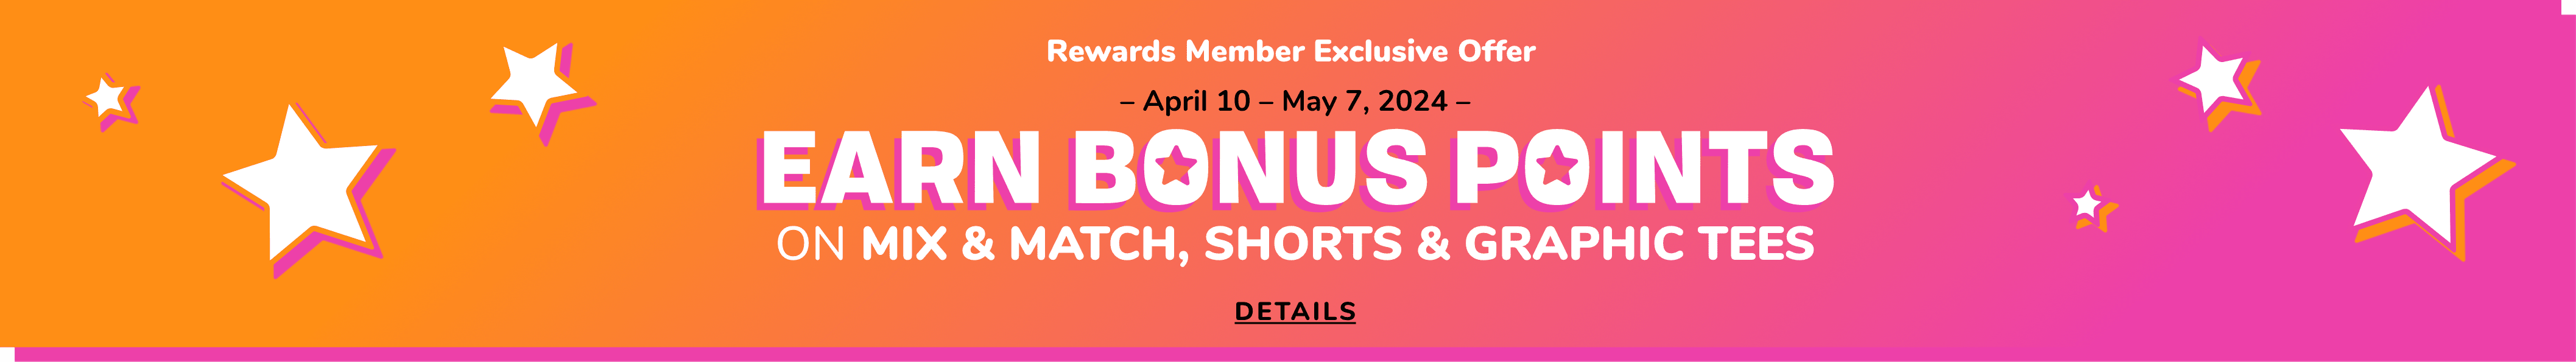 Rewards Member Exclusive. Limited Time Only-Earn Bonus Points on EVERY.APP.PURCHASE.